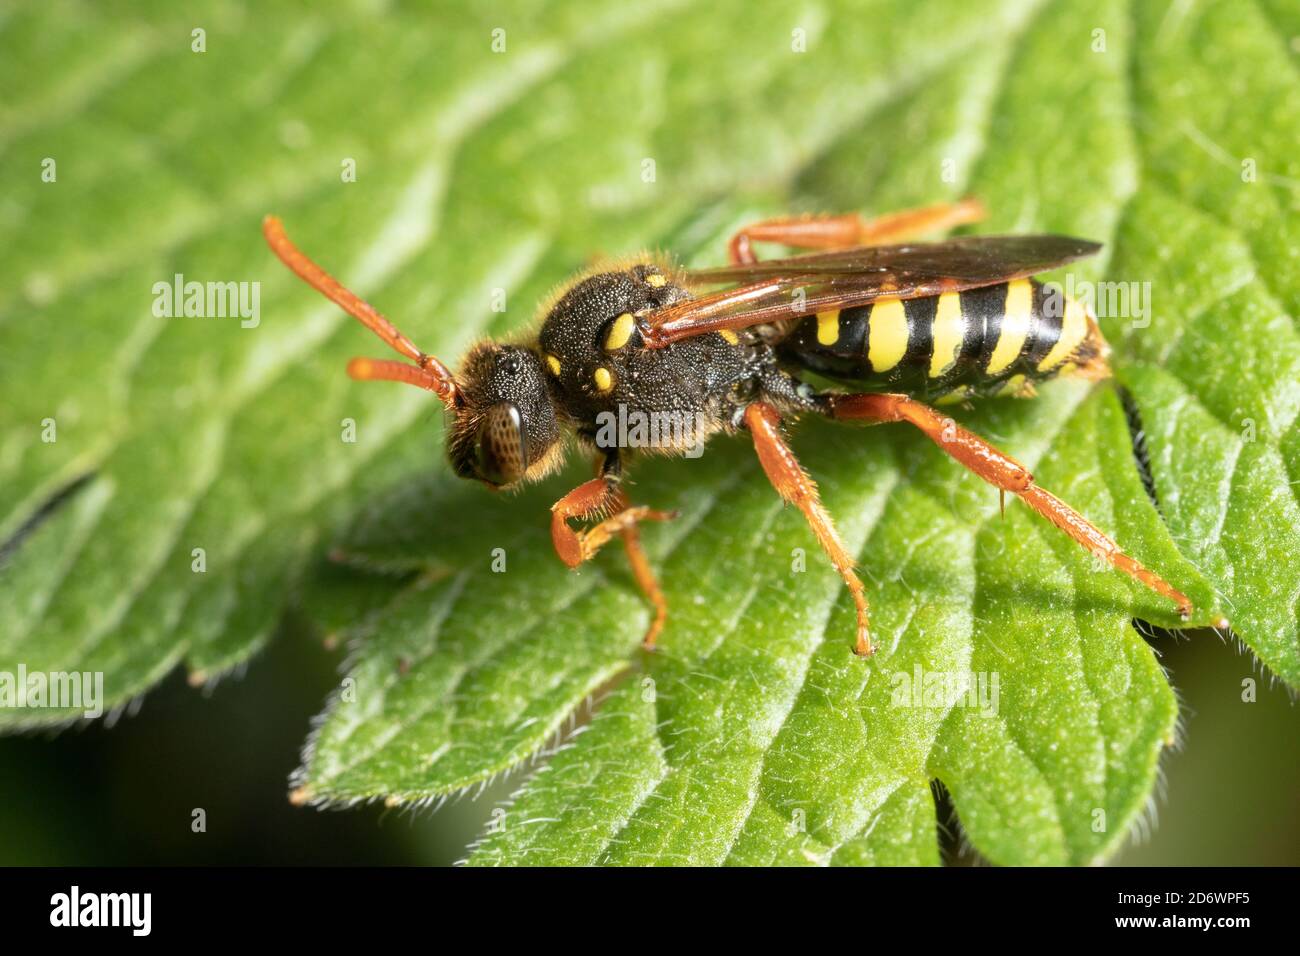 Goodens nomad bee - a cuckoo/ parasitic bee that lays its eggs in the nests of other solitary bees. Stock Photo